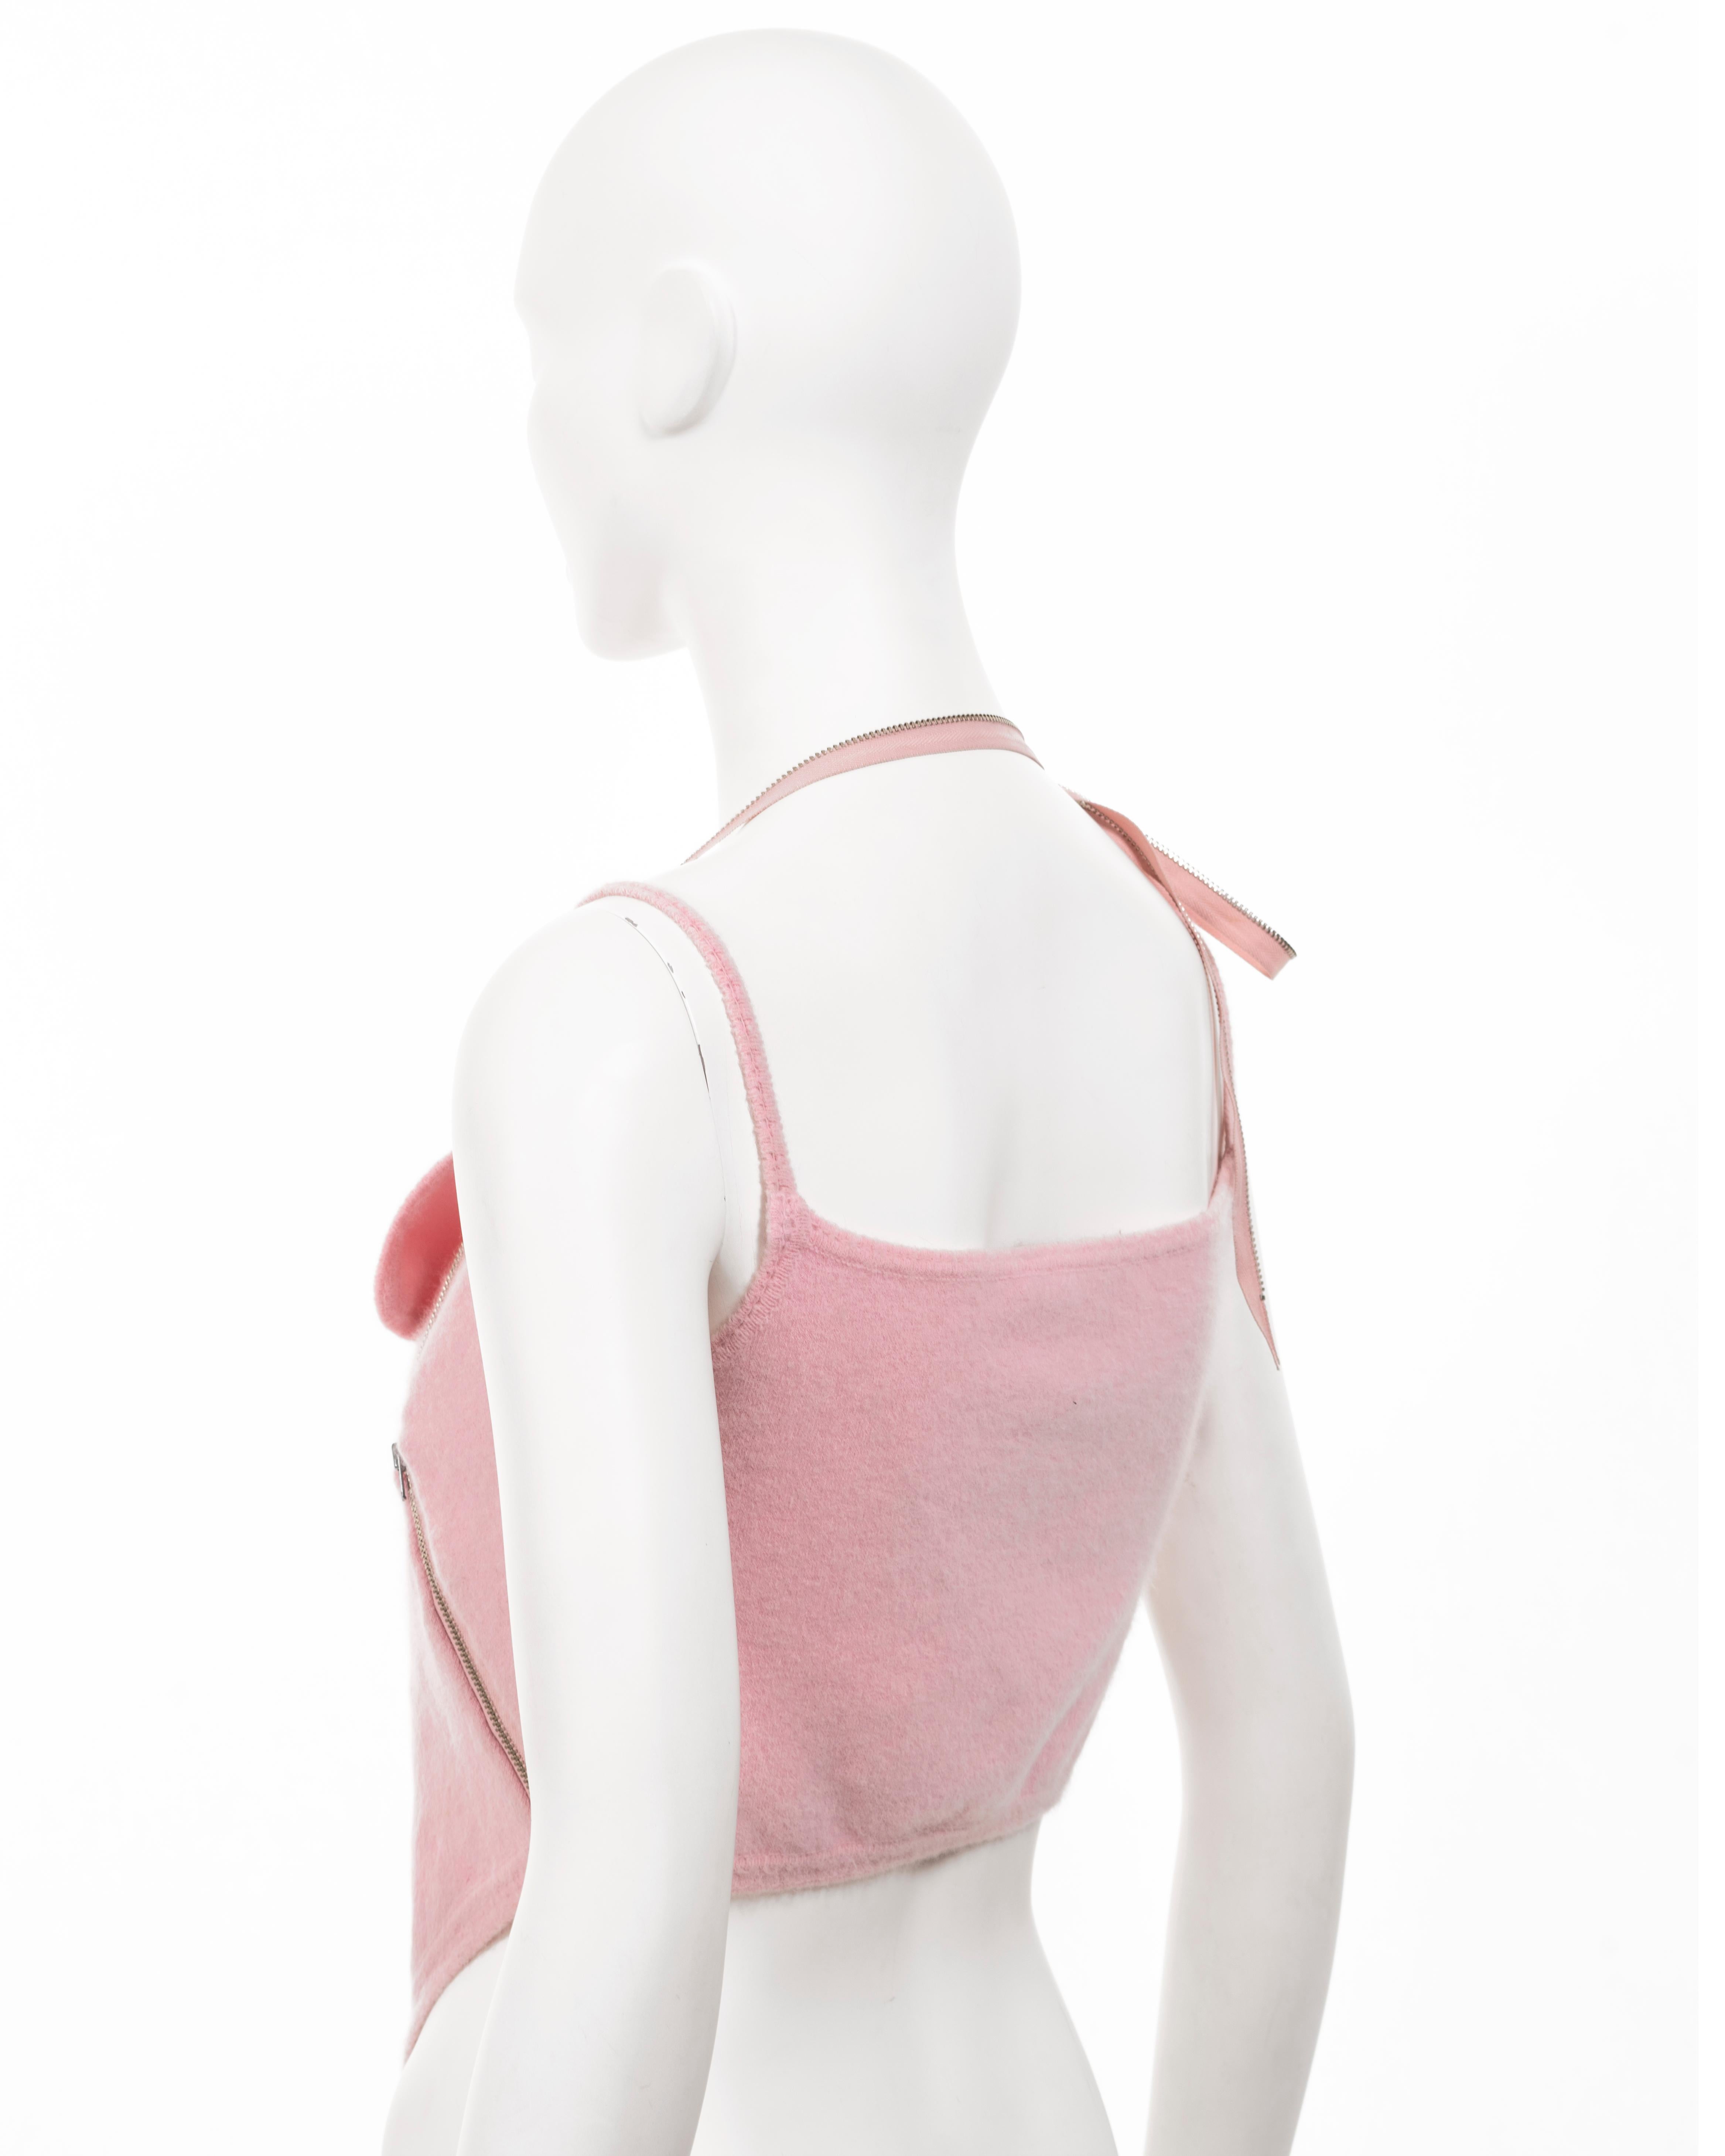 John Galliano baby pink fuzzy knitted crop top with zippers, ss 2000 For Sale 5